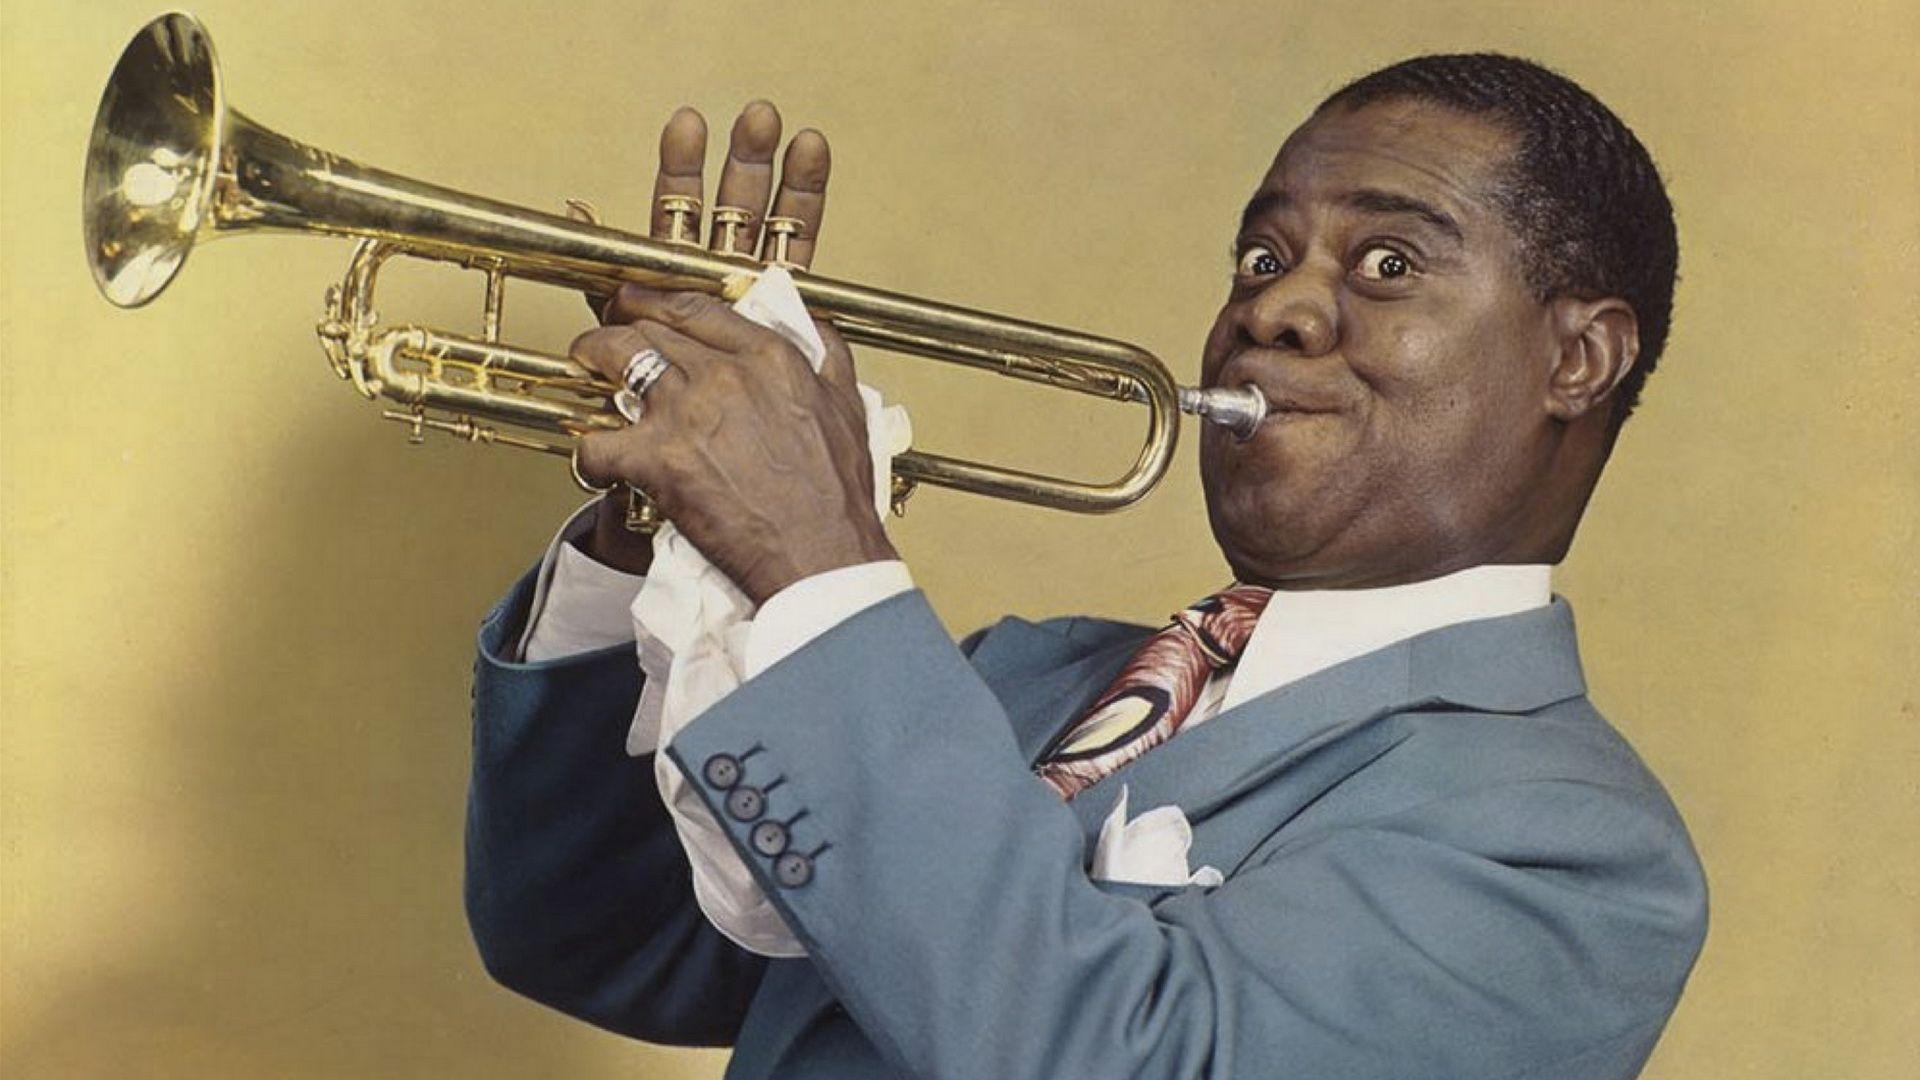 Louis Armstrong Wallpaper 2014 HD. I HD Image